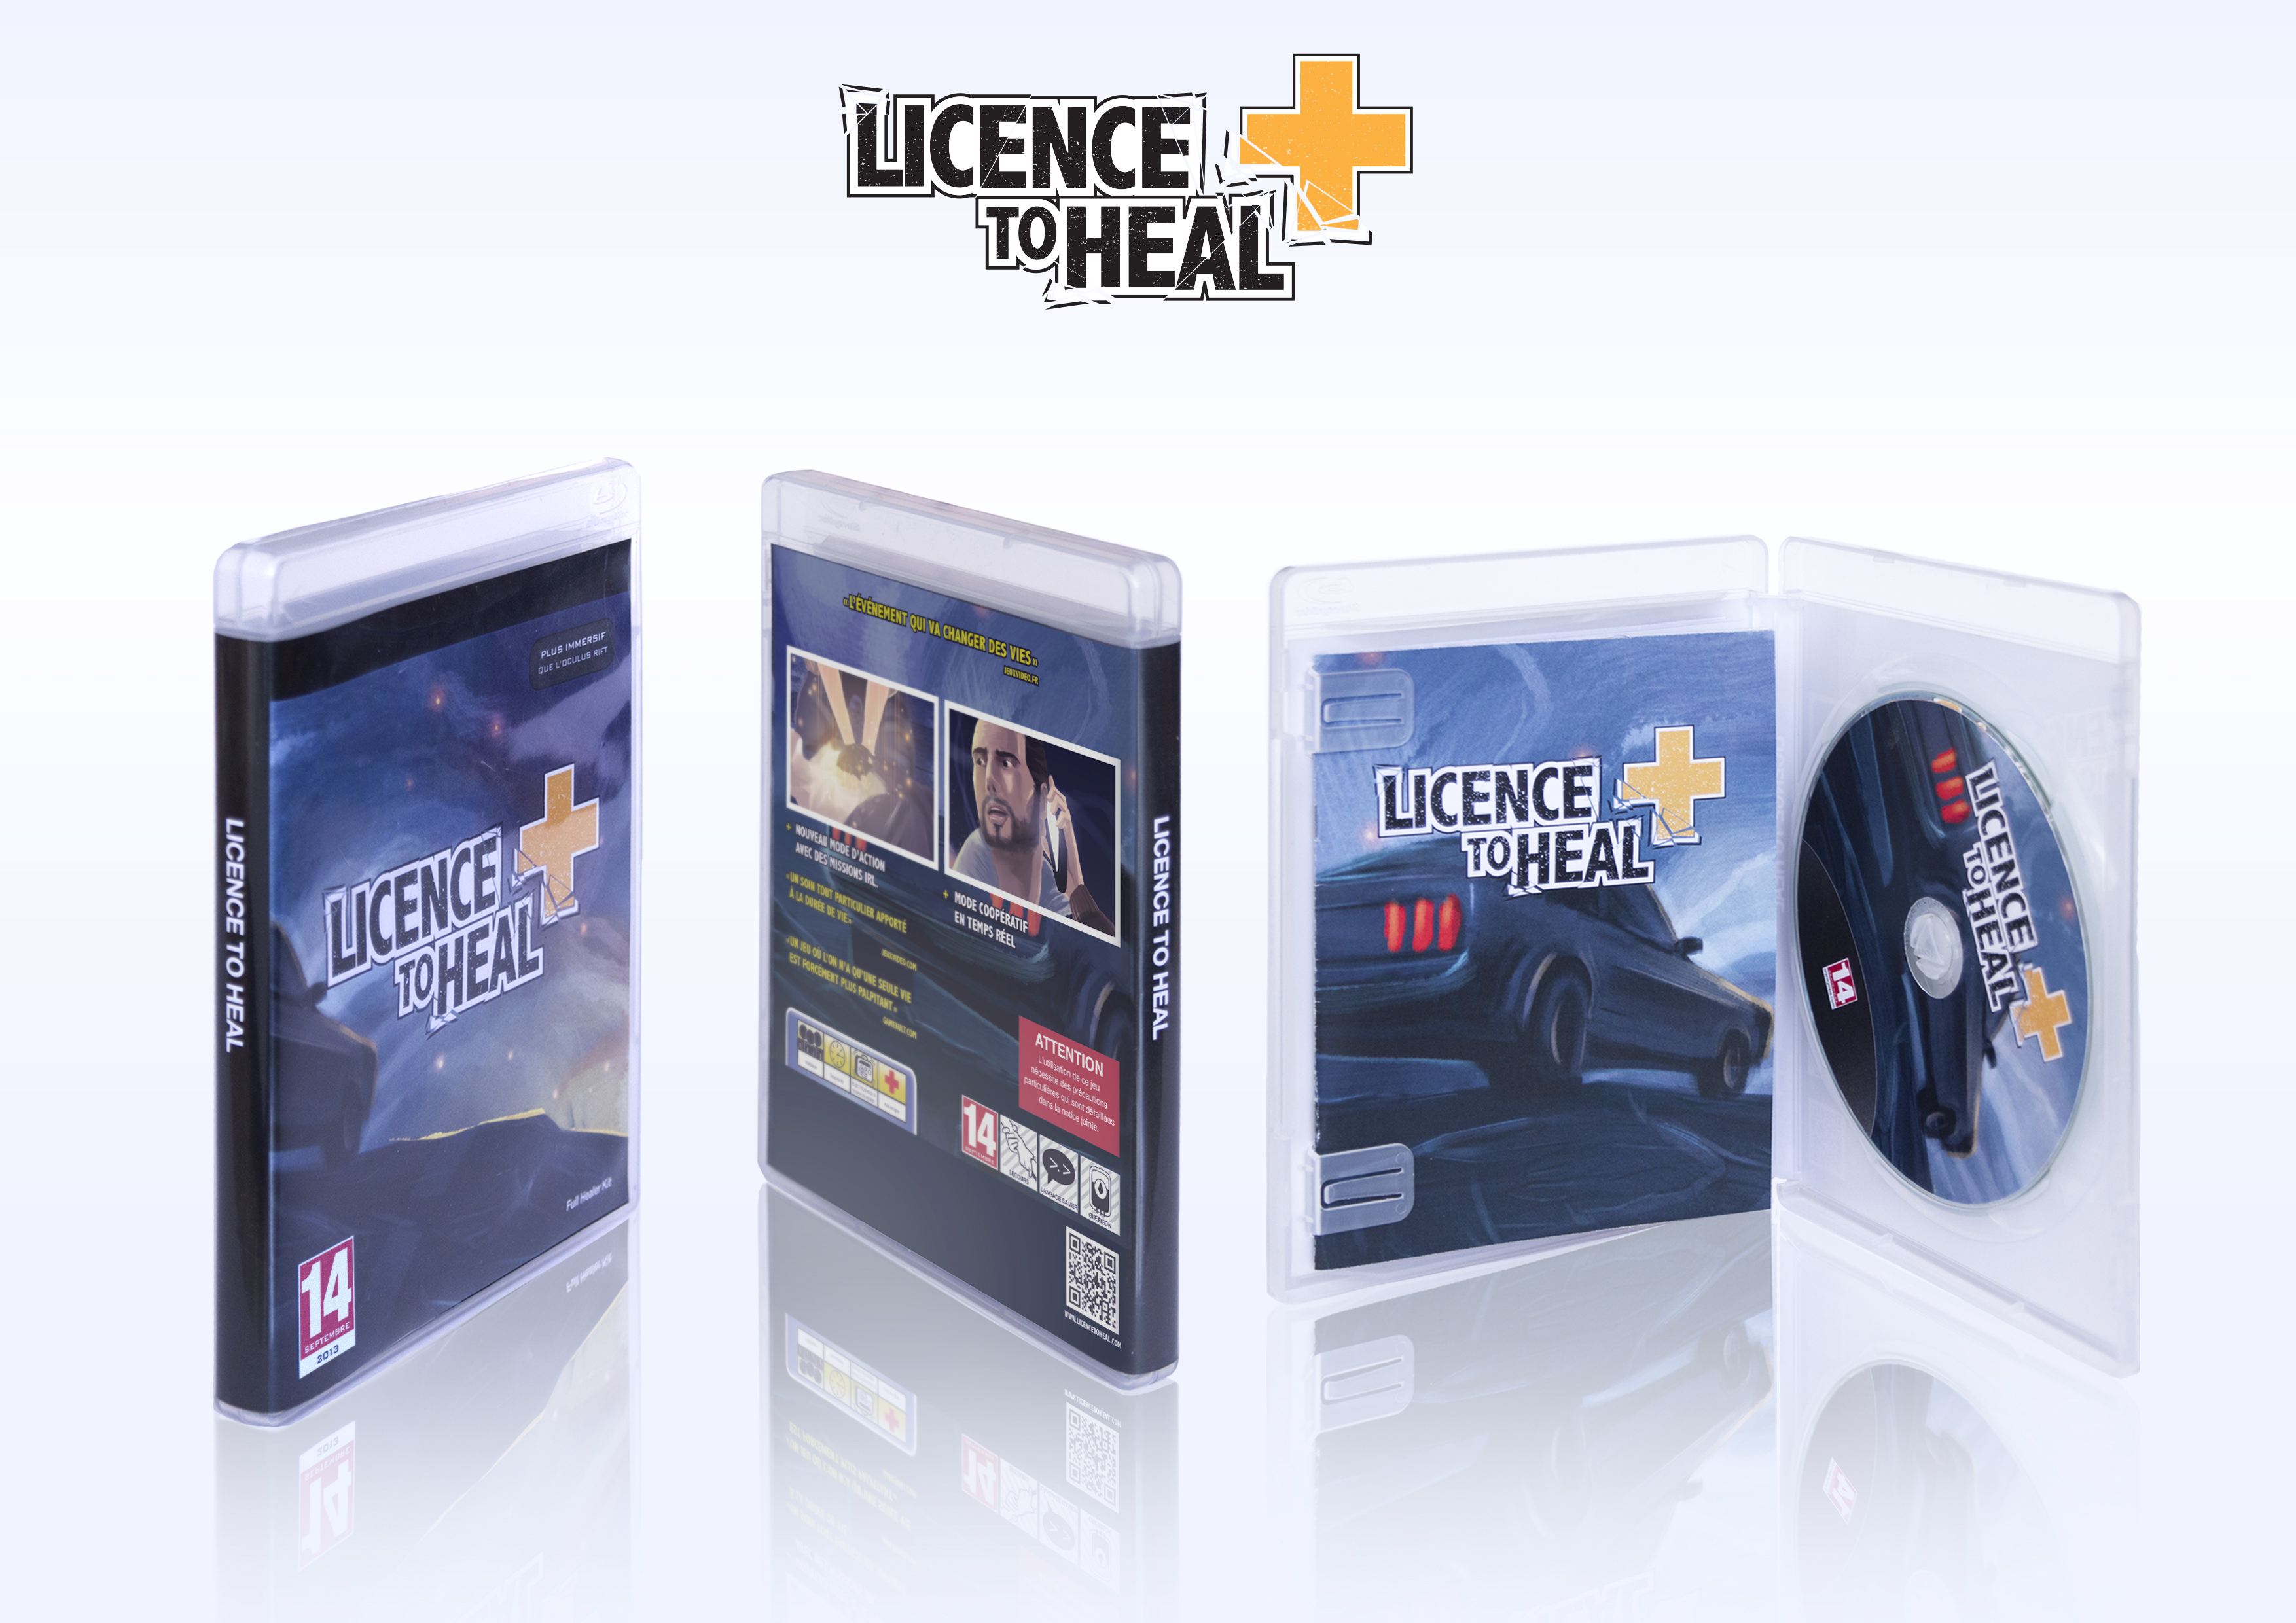 Licence-to-heal-CD